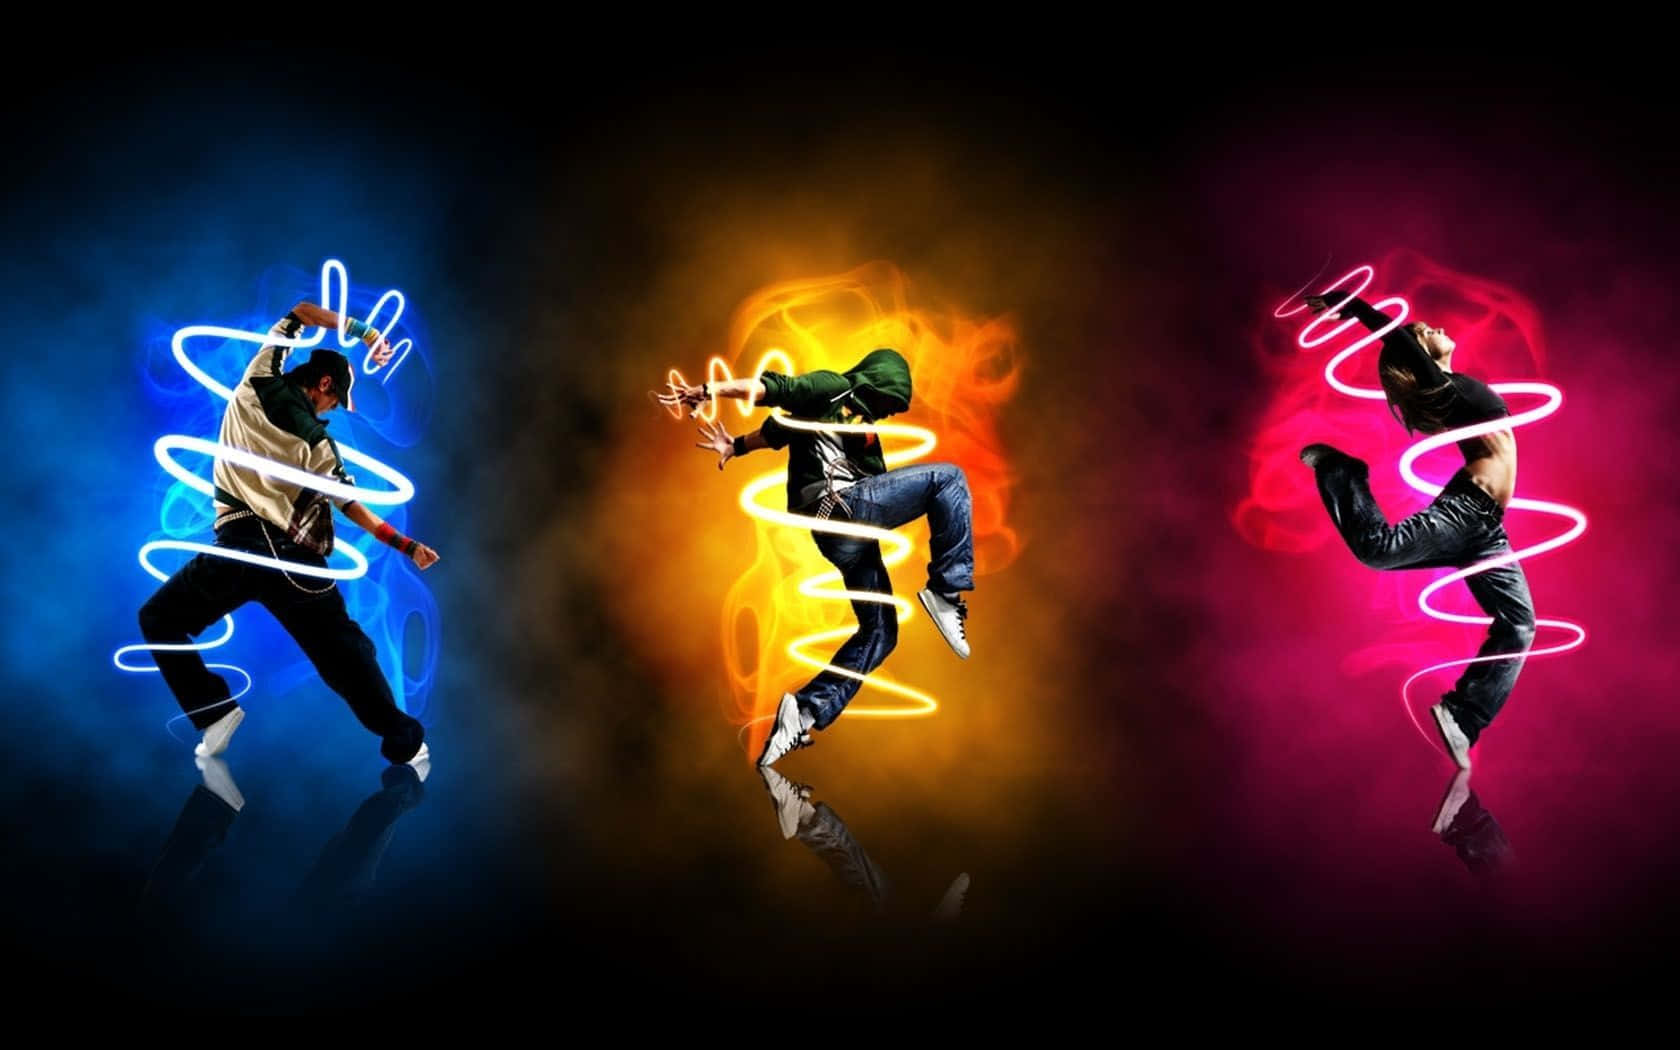 Three Dancers In Different Colors On A Black Background